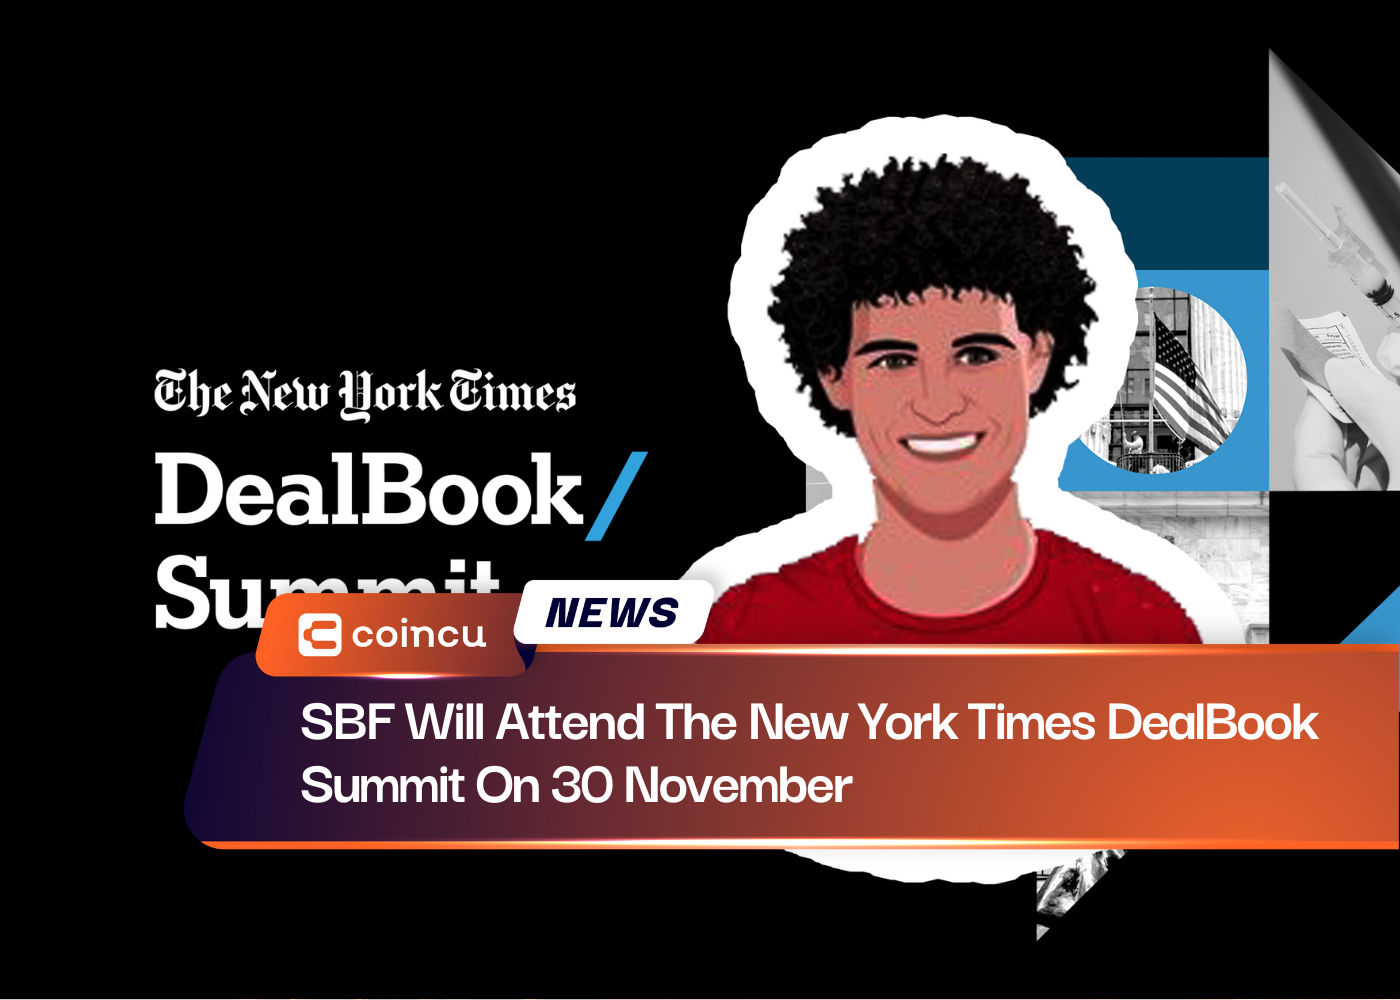 SBF Will Attend The New York Times DealBook Summit On 30 November